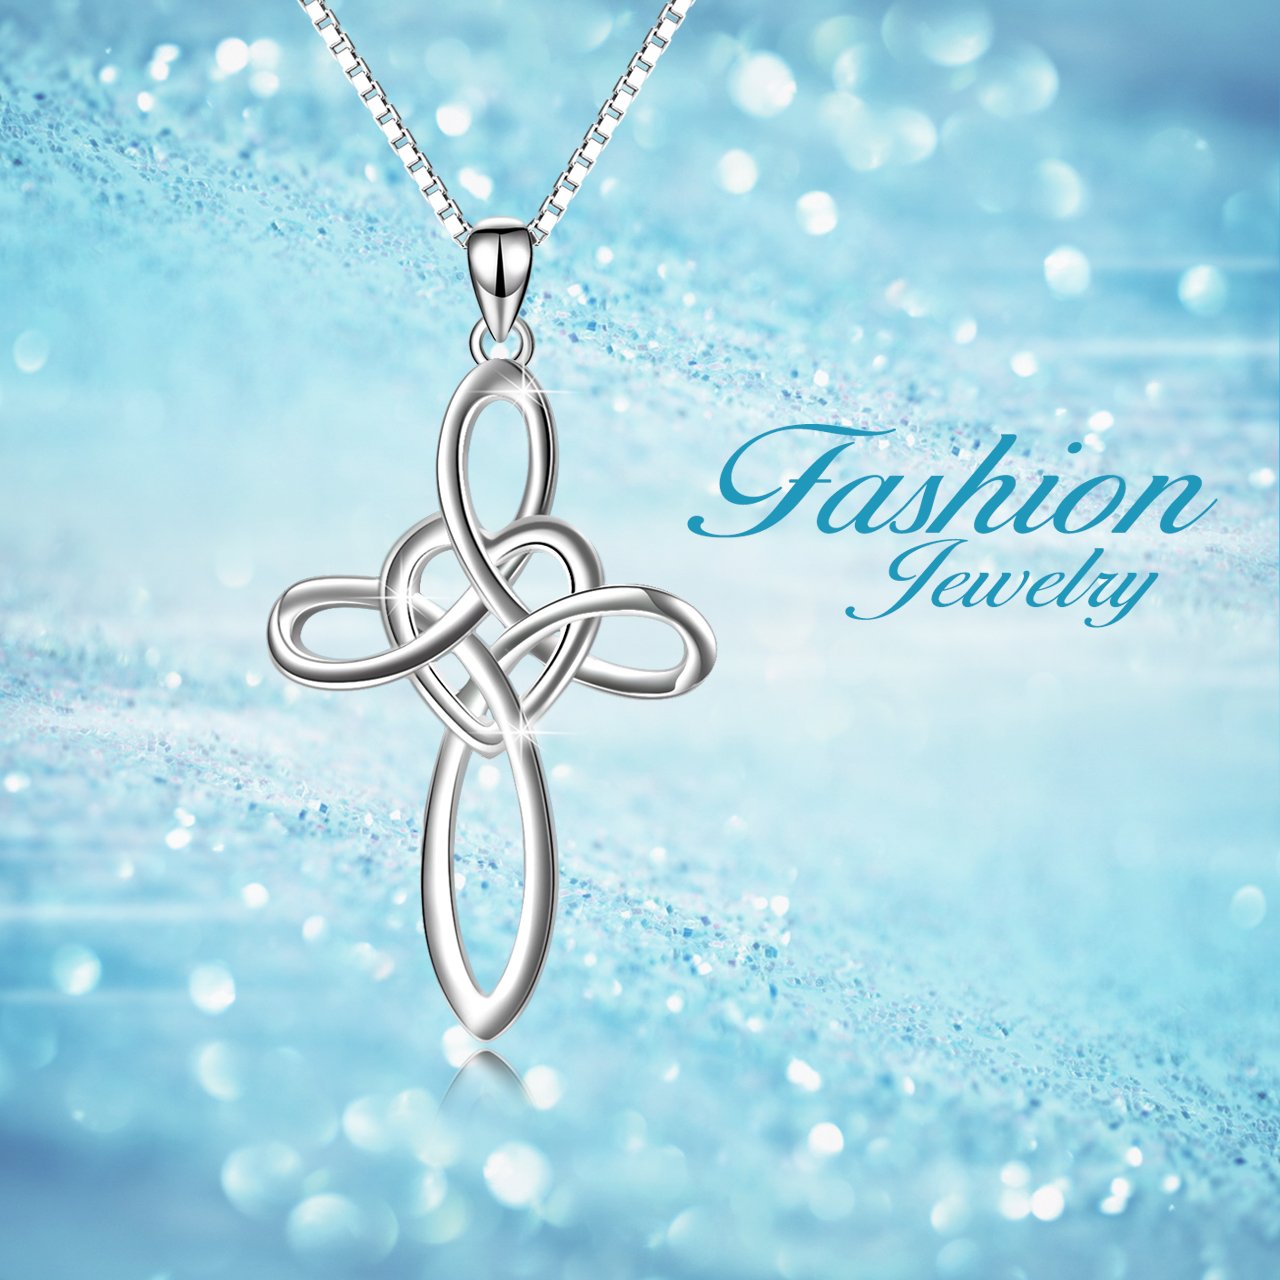 YFN Celtic Knot Cross Necklace Sterling Silver Infinity Love Heart Pendant Necklace